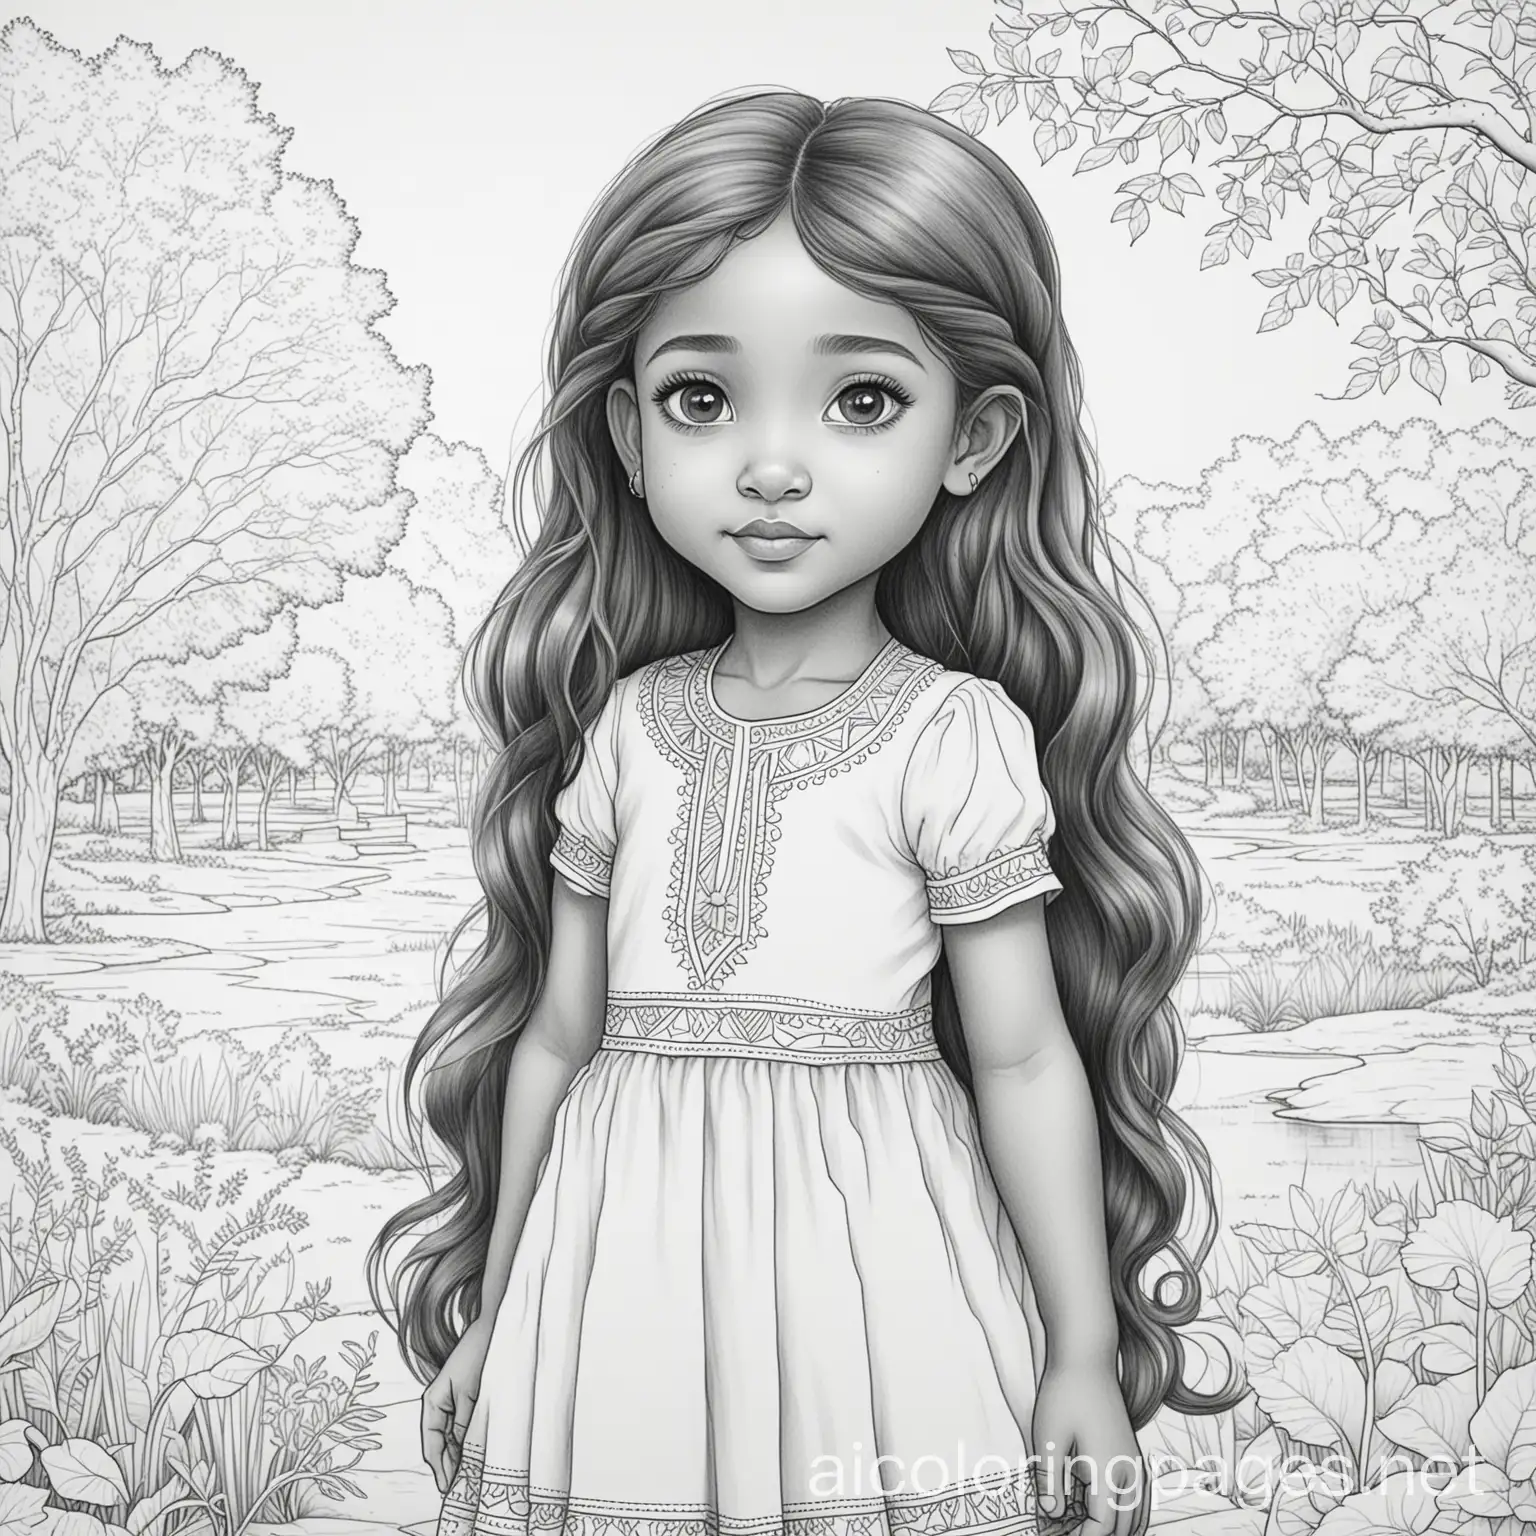 African-indian girl with long hair a the park, Coloring Page, black and white, line art, white background, Simplicity, Ample White Space. The background of the coloring page is plain white to make it easy for young children to color within the lines. The outlines of all the subjects are easy to distinguish, making it simple for kids to color without too much difficulty